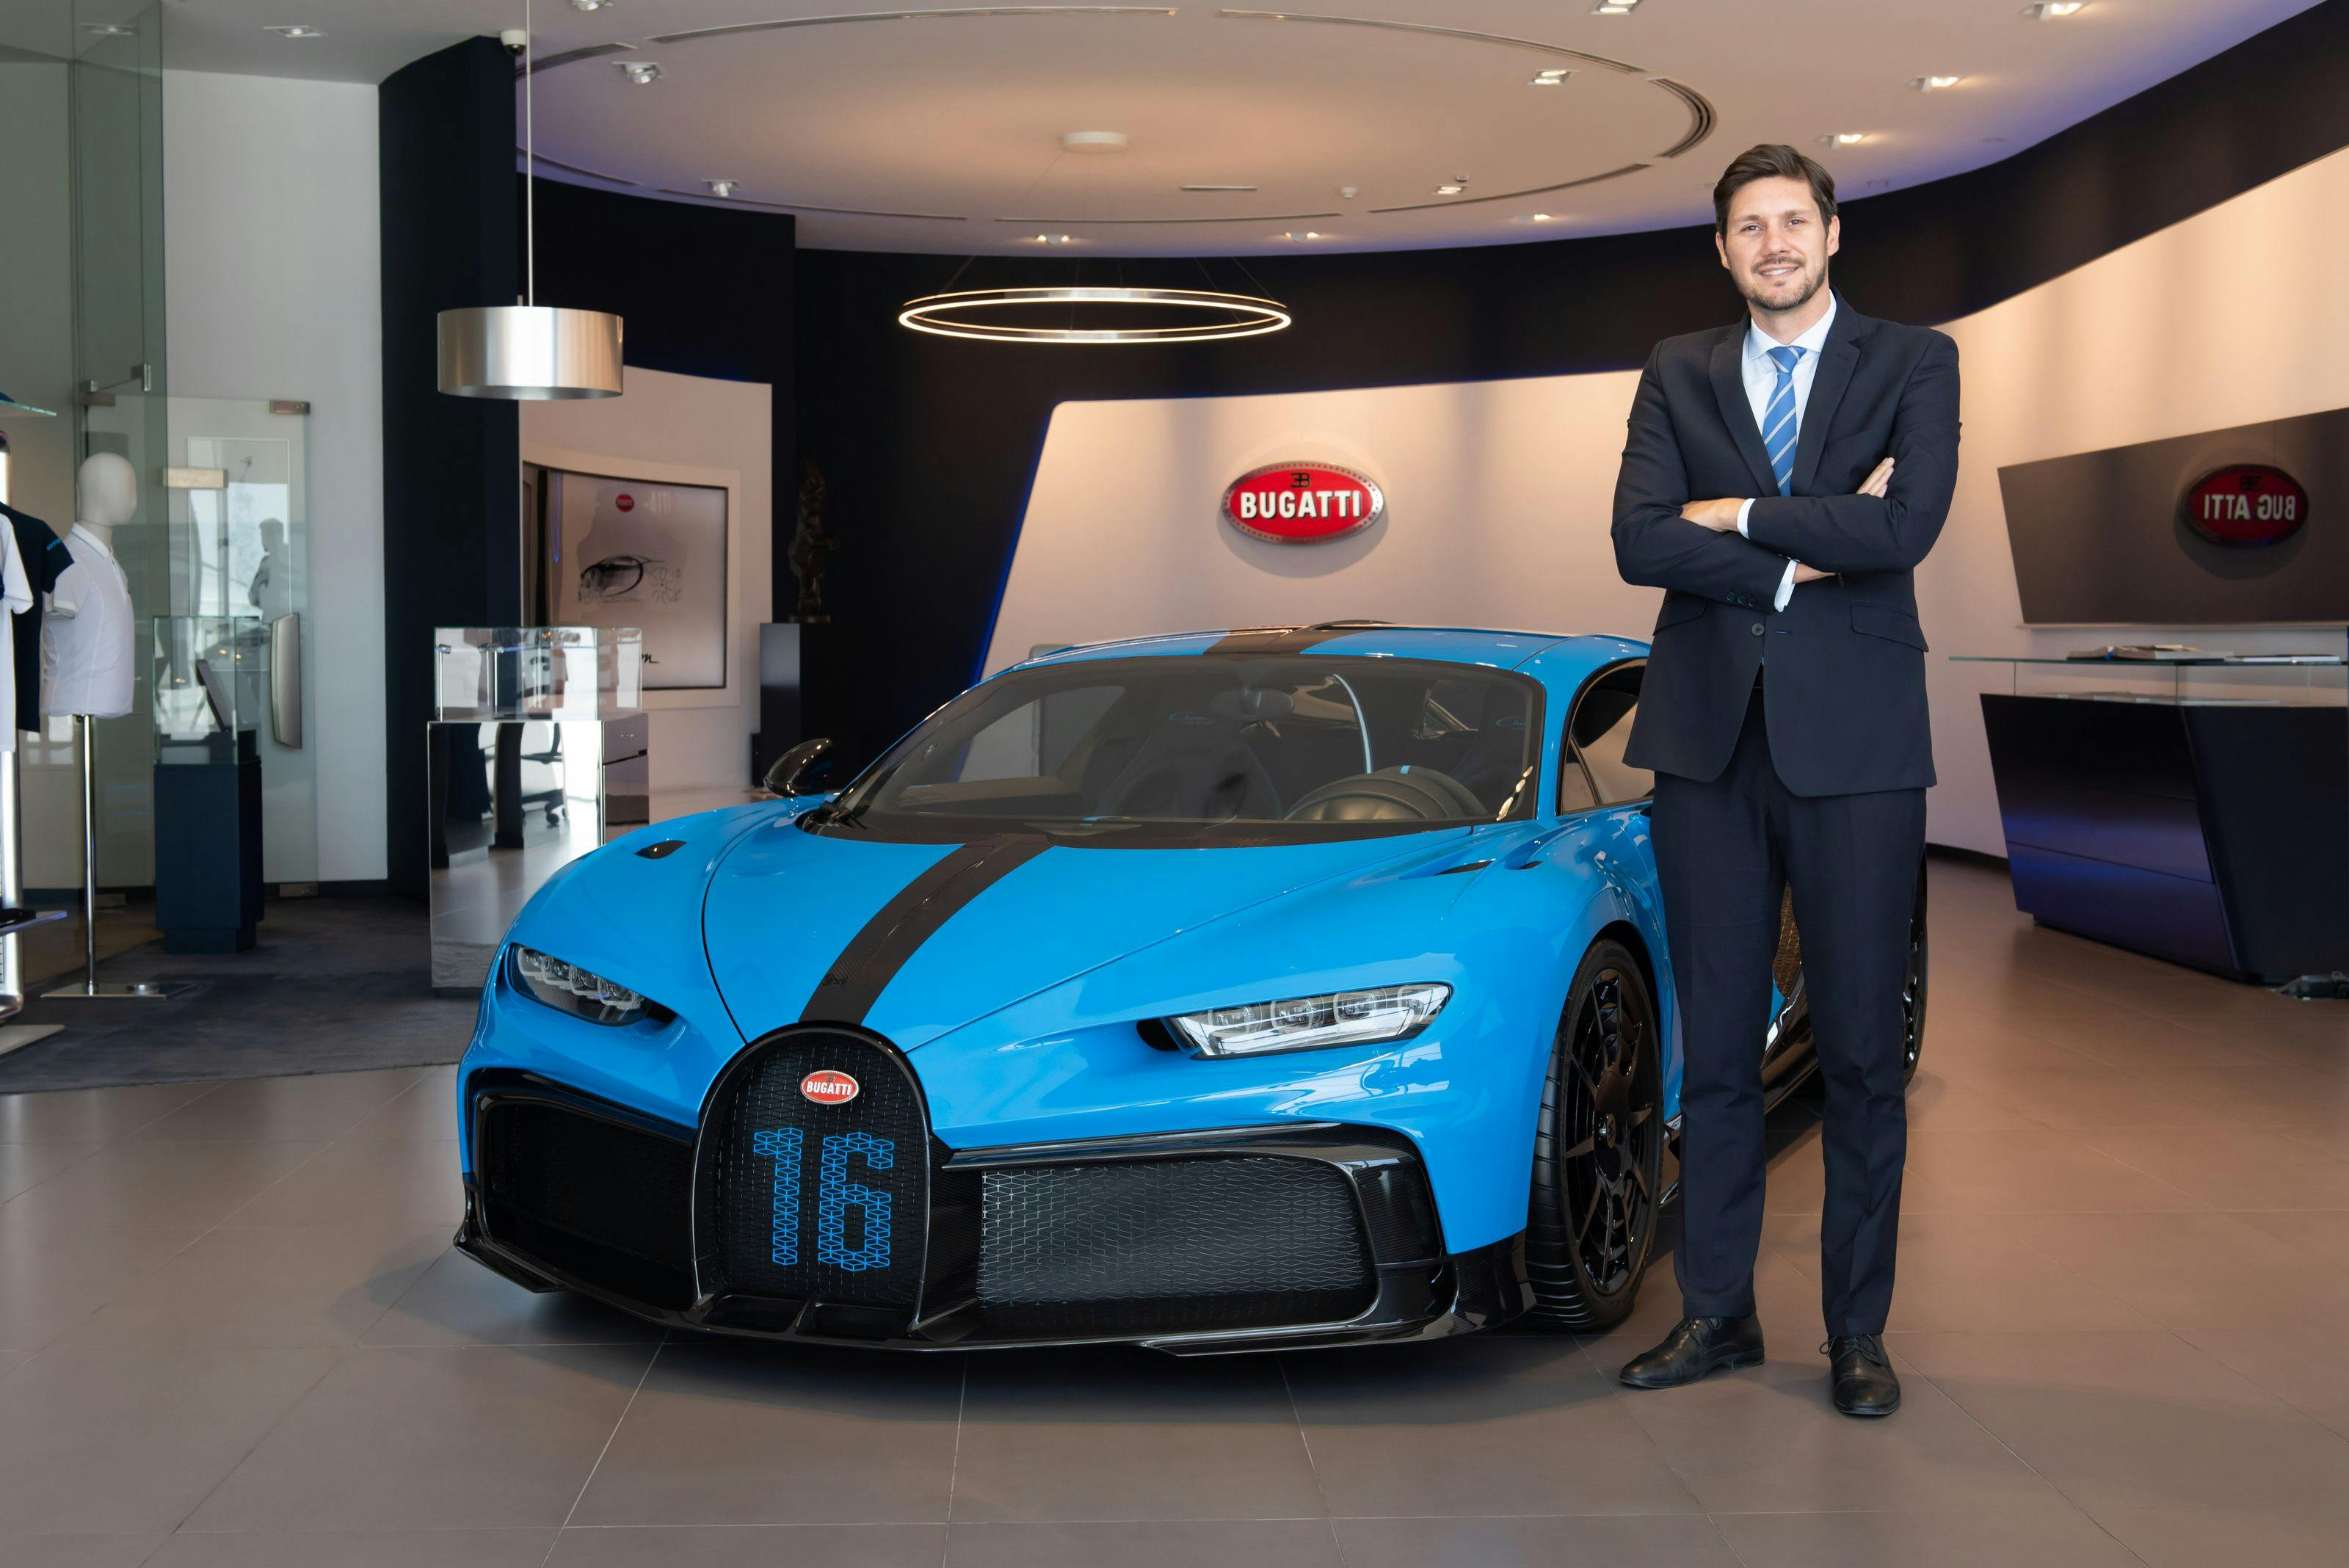 Bugatti working from home – Kostas Psarris and the MEA Region